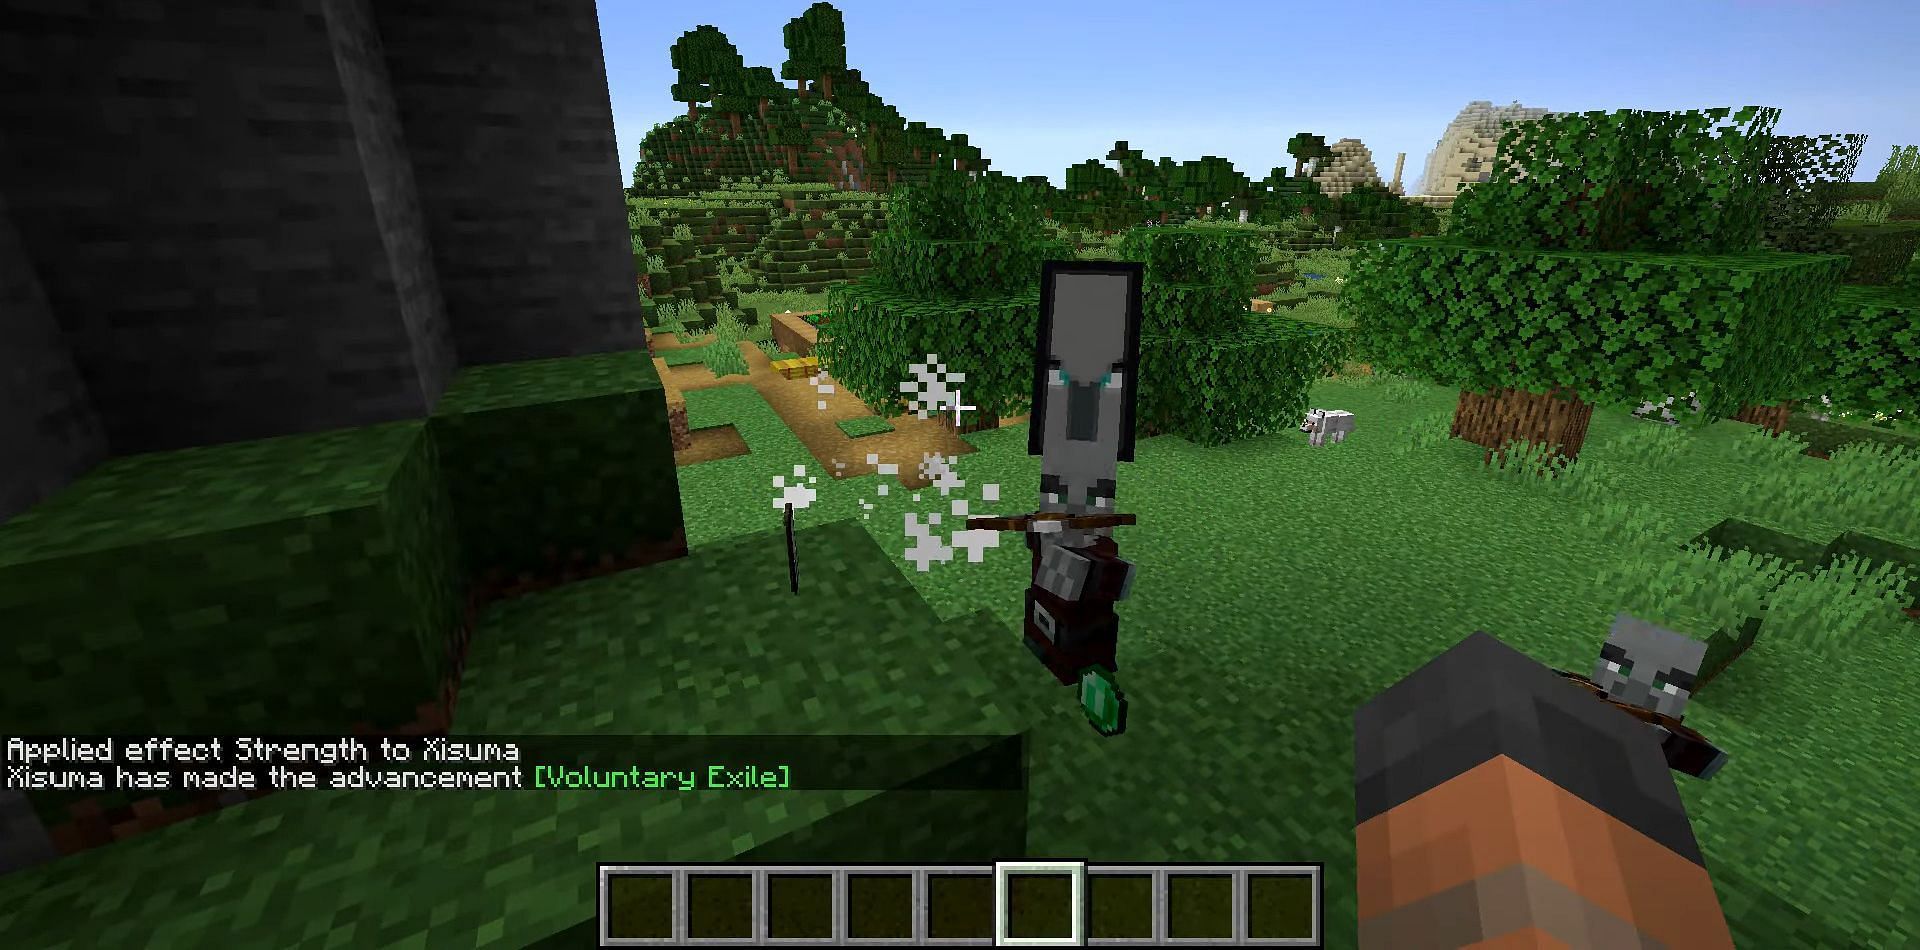 Voluntary Exile comes when the captain is killed (Image via Minecraft)